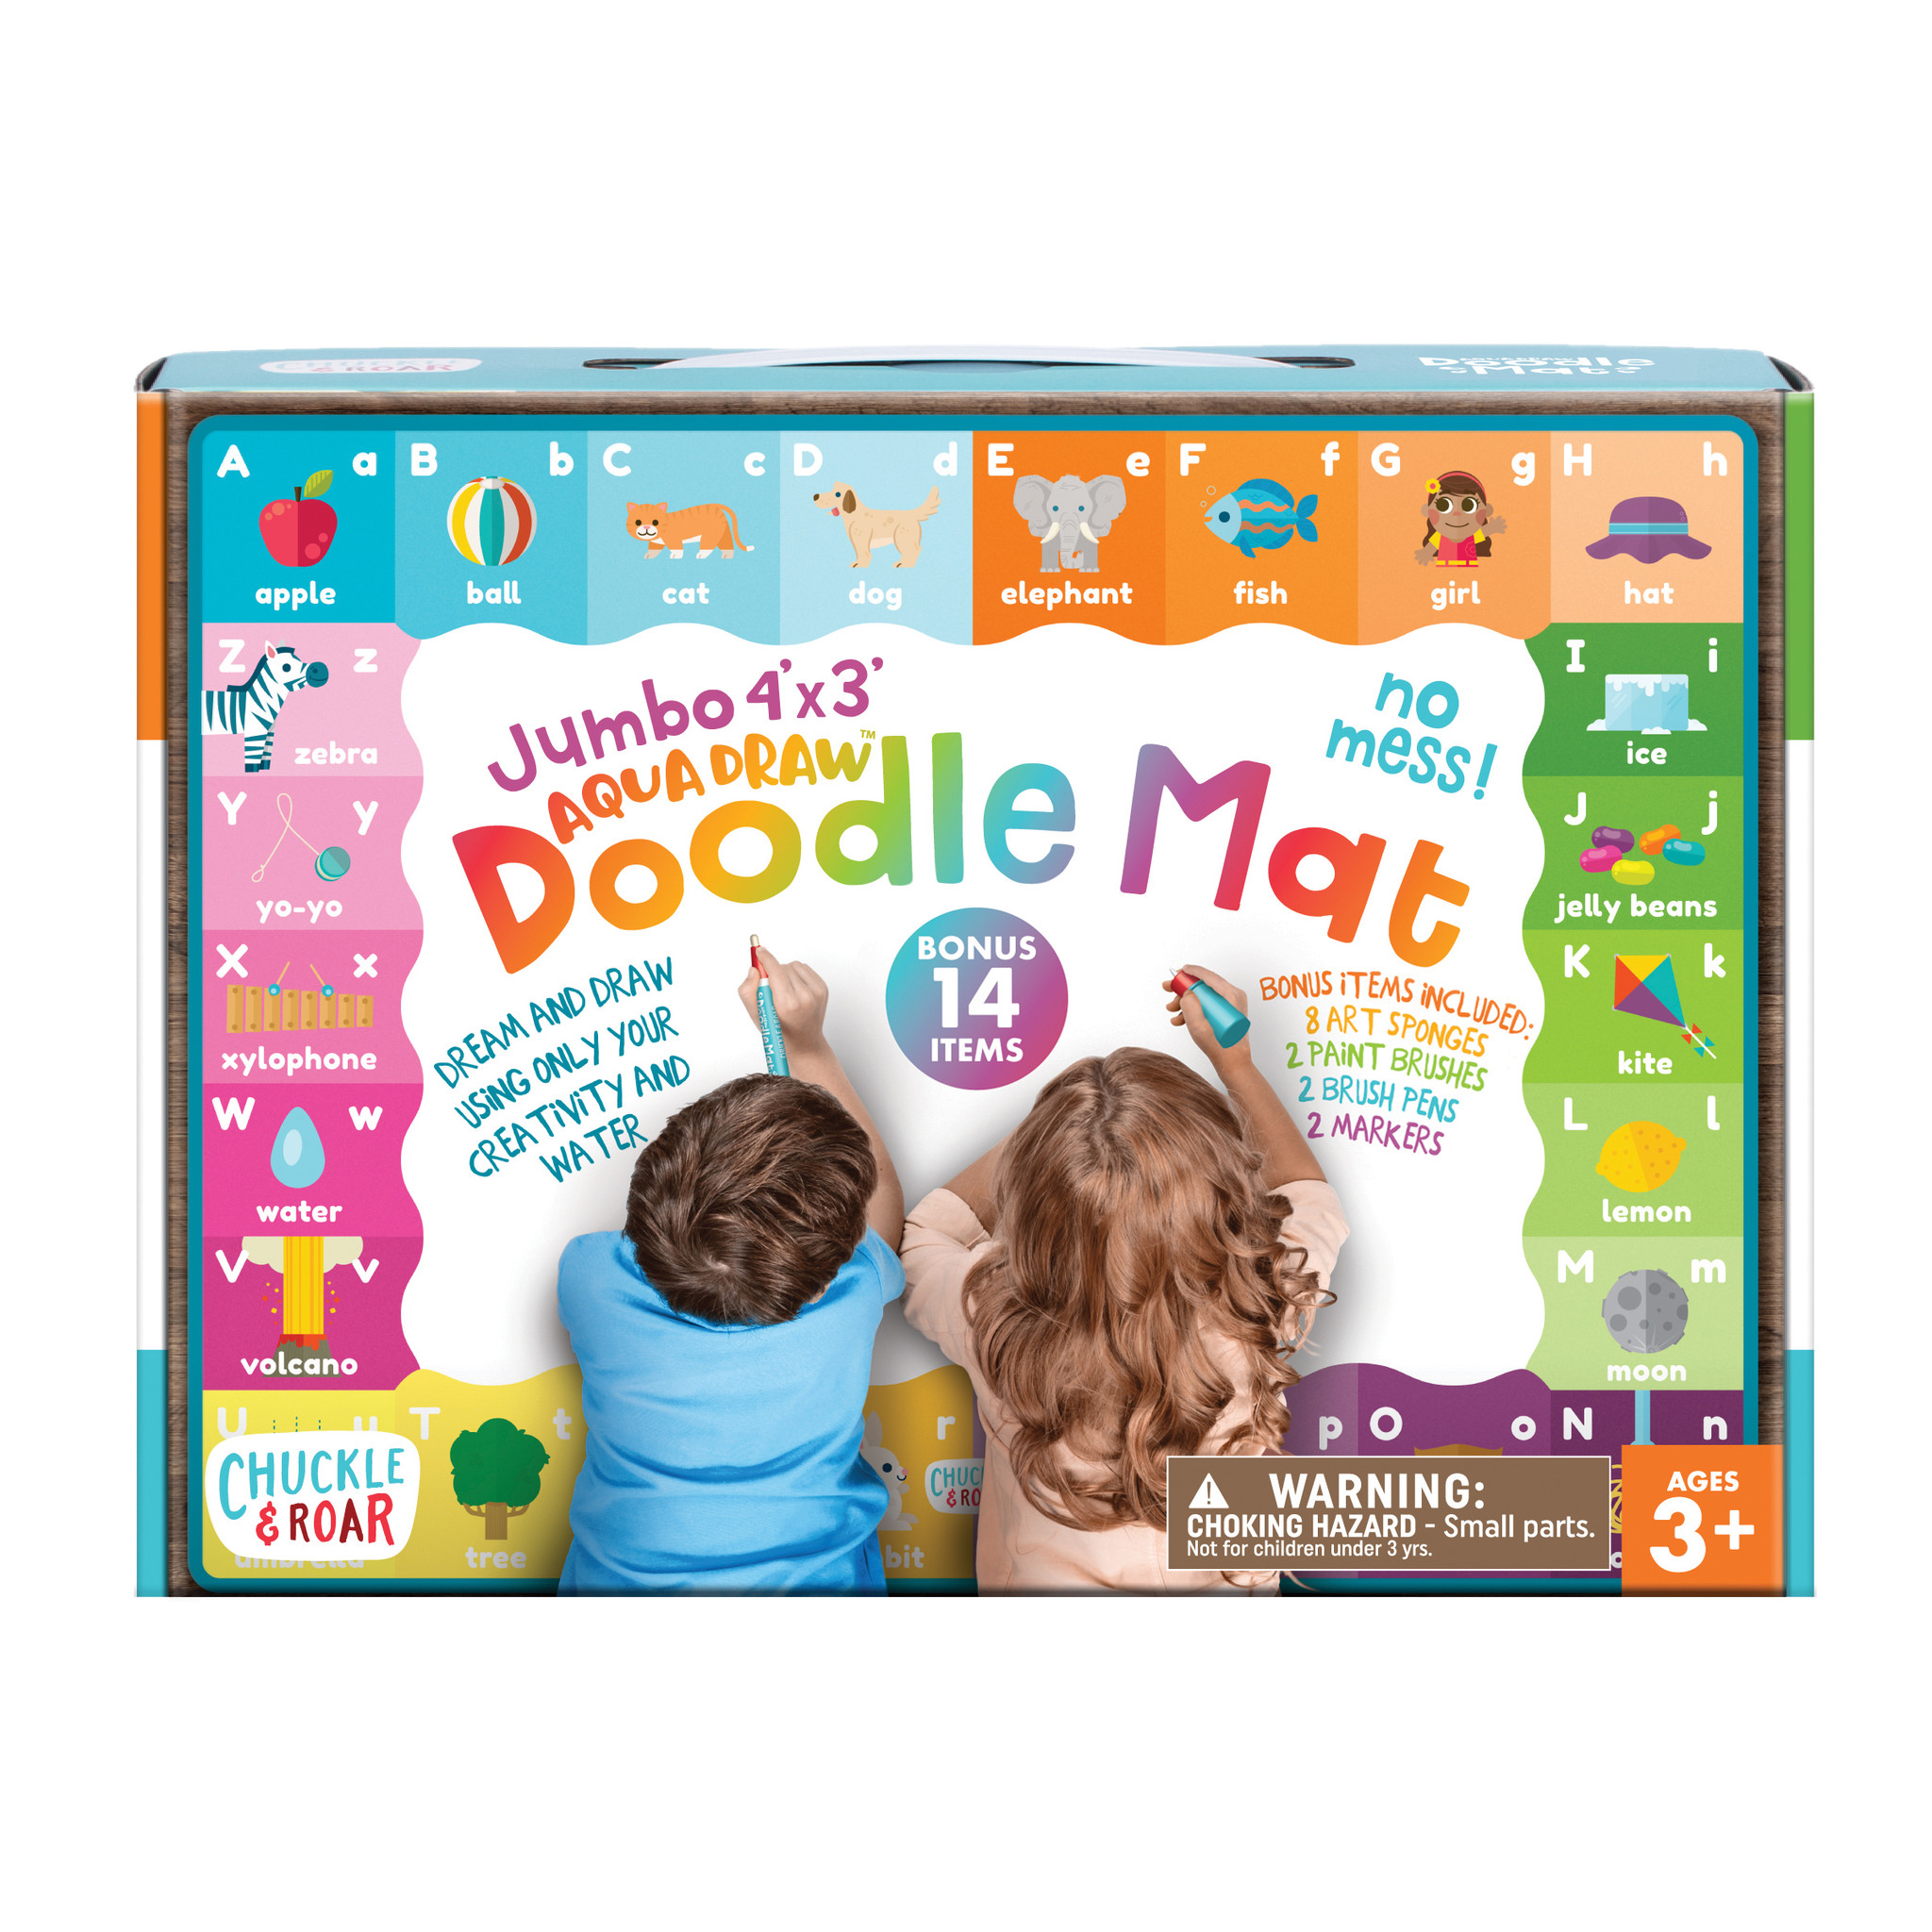 Tomy Aquadoodle Trend Animal Water Coloring Mat - Lawazm